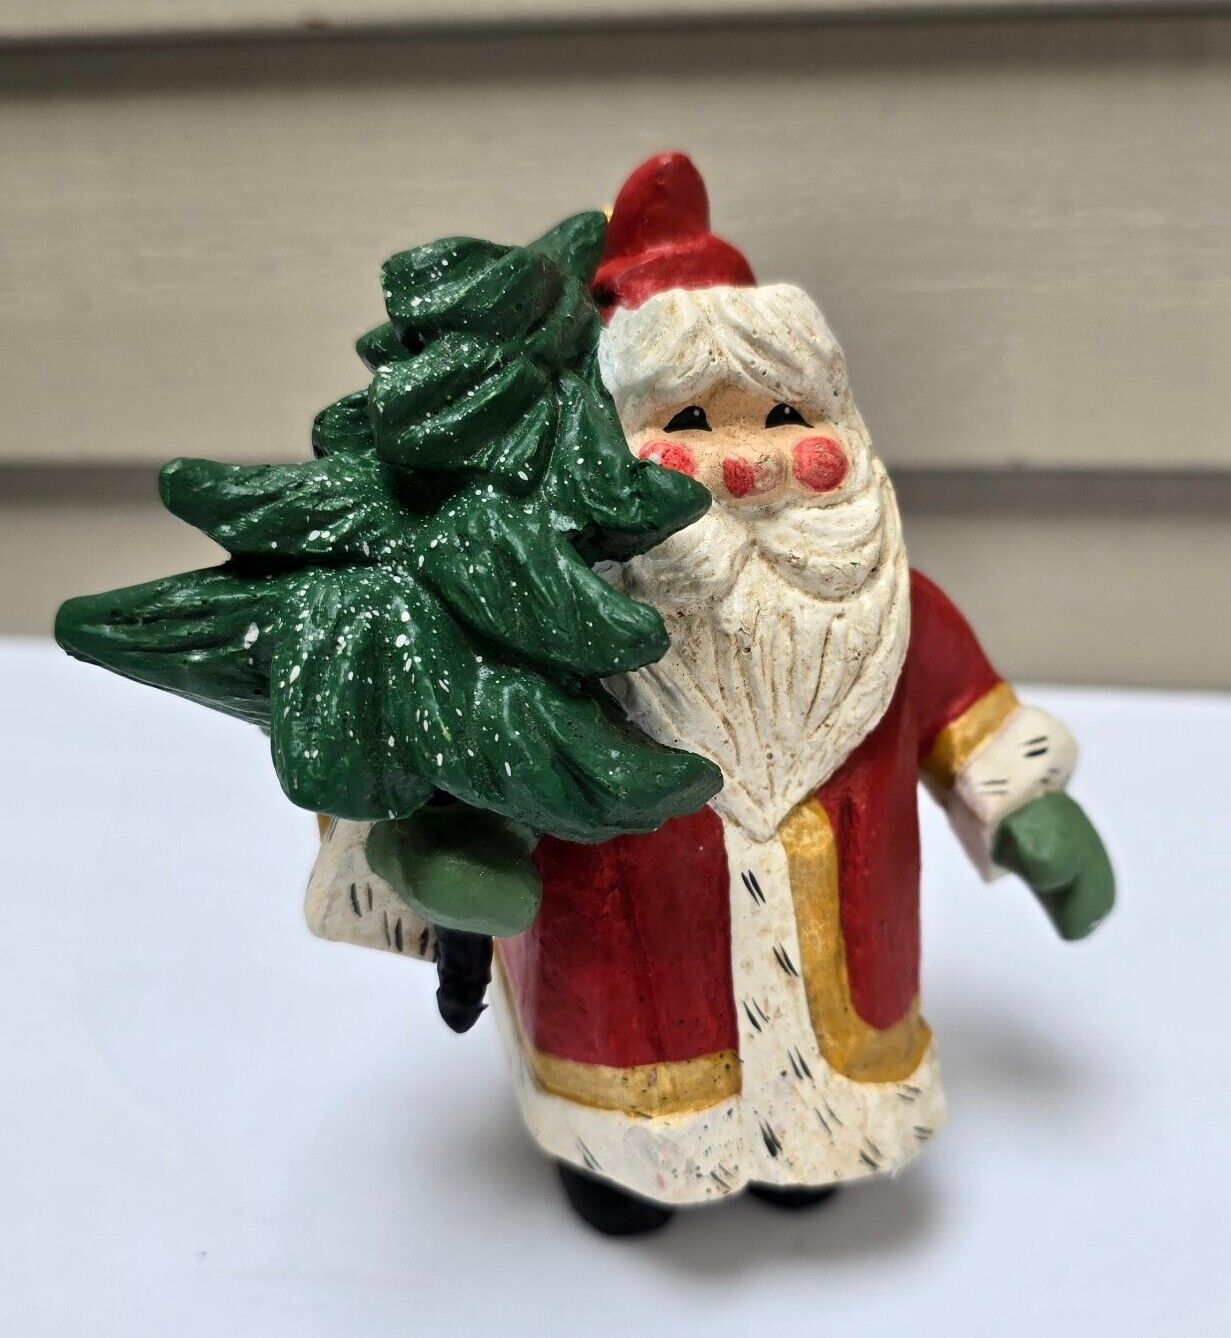 1994 HOUSE of HATTEN Red Santa Claus Holding a Christmas Tree Ornament 